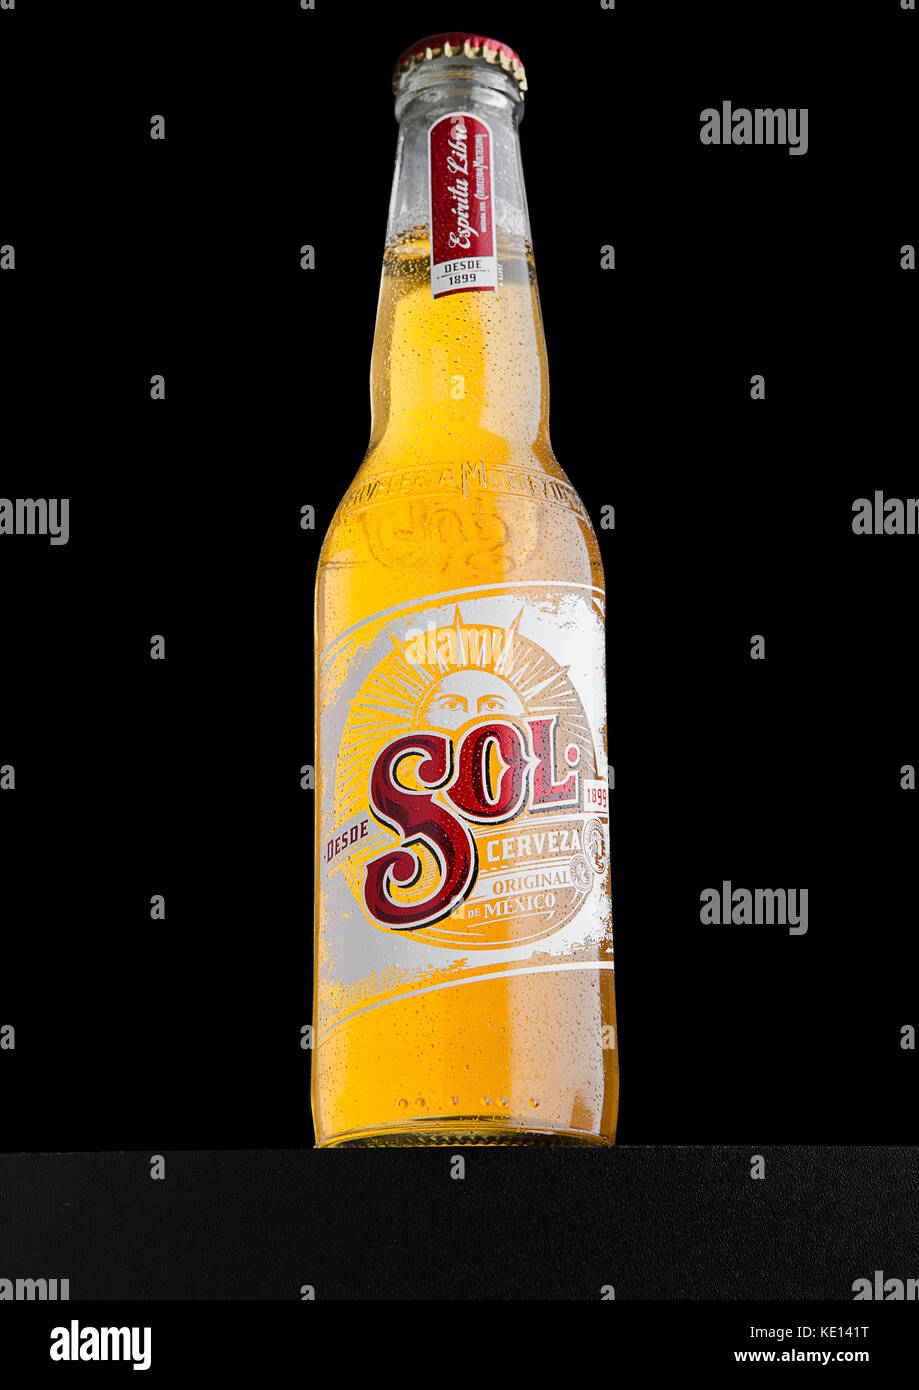 LONDON, UK - DECEMBER 15, 2016: Bottle of Sol Mexican Beer on black background. From the Cuauhtemoc Moctezuma Brewery, in Monterey, Mexico, it was fir Stock Photo